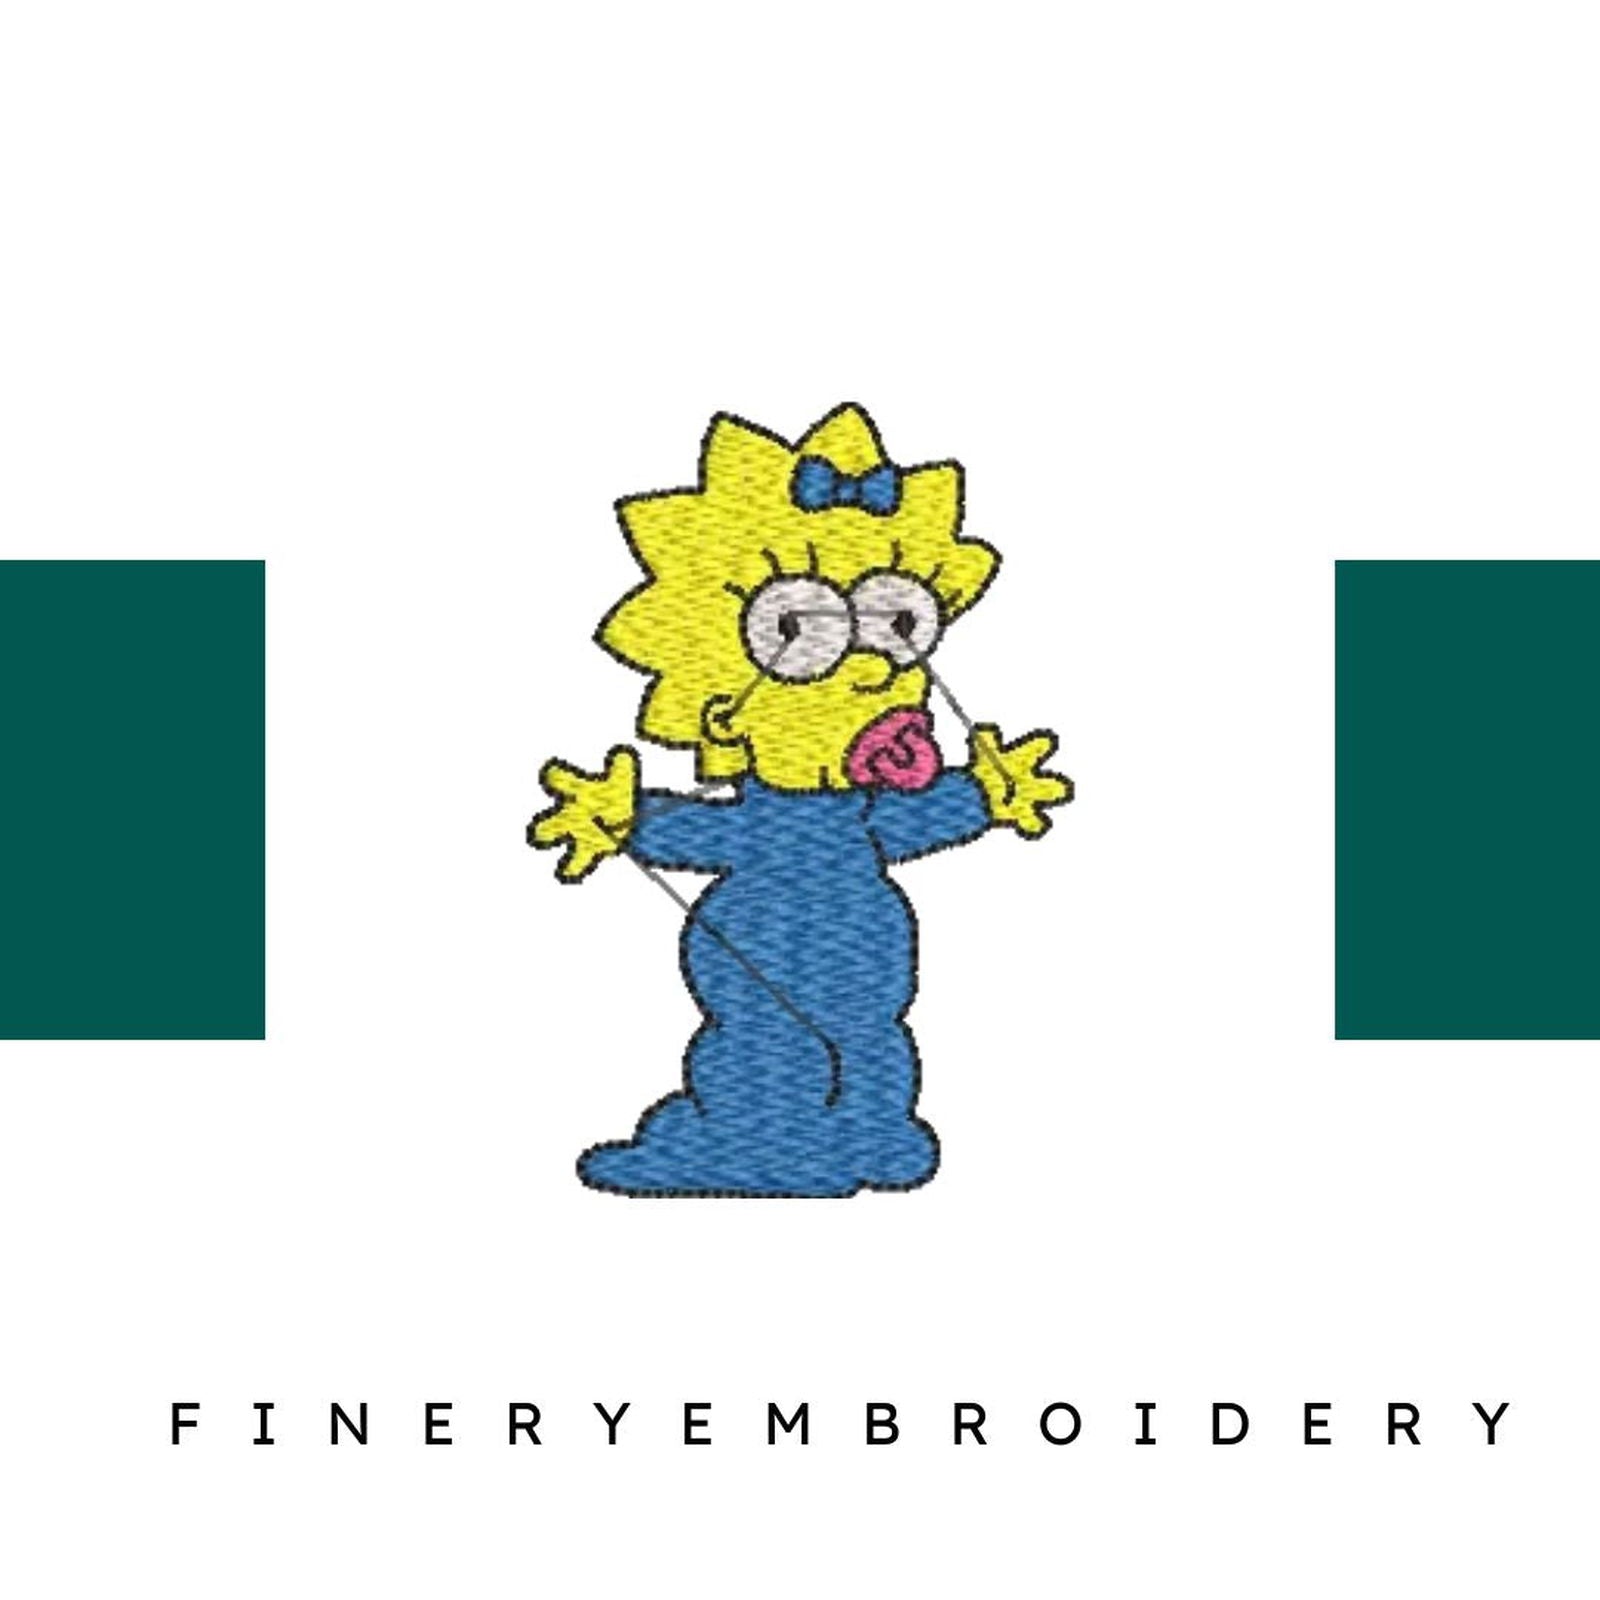 Simpsons  21 - Embroidery Design - FineryEmbroidery